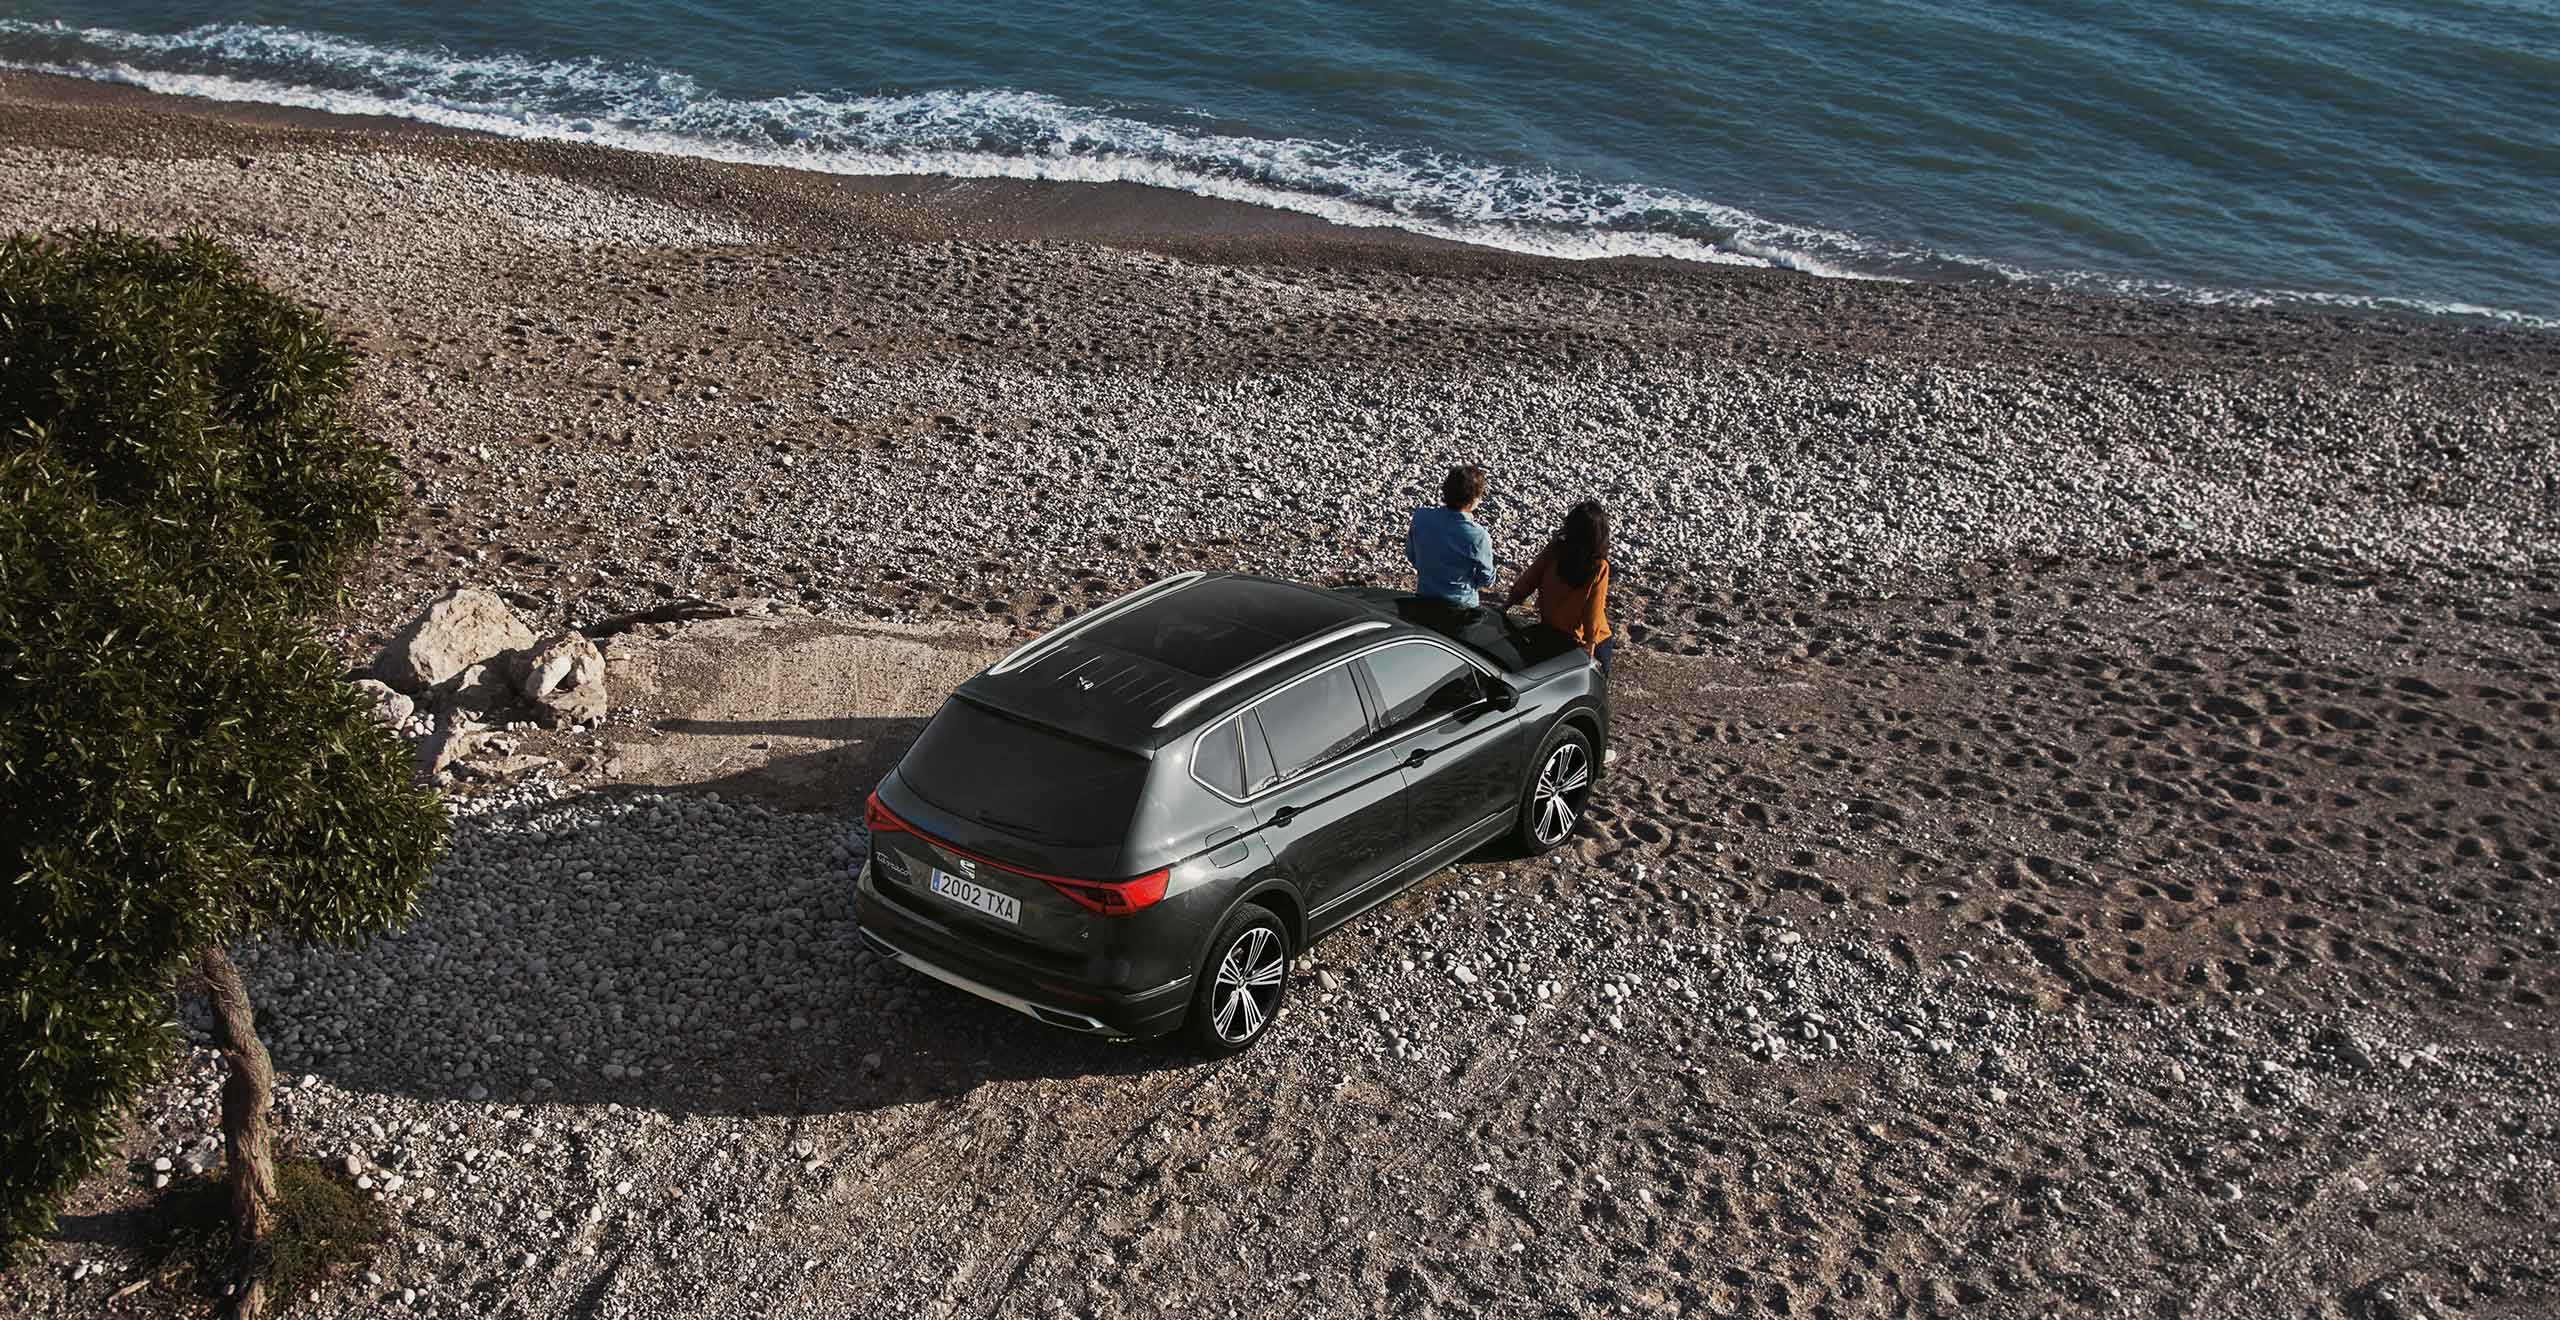 New SEAT Tarraco parked on beach with roadside assistance for fuel refill and dead battery maintenance couple in front of the Tarraco